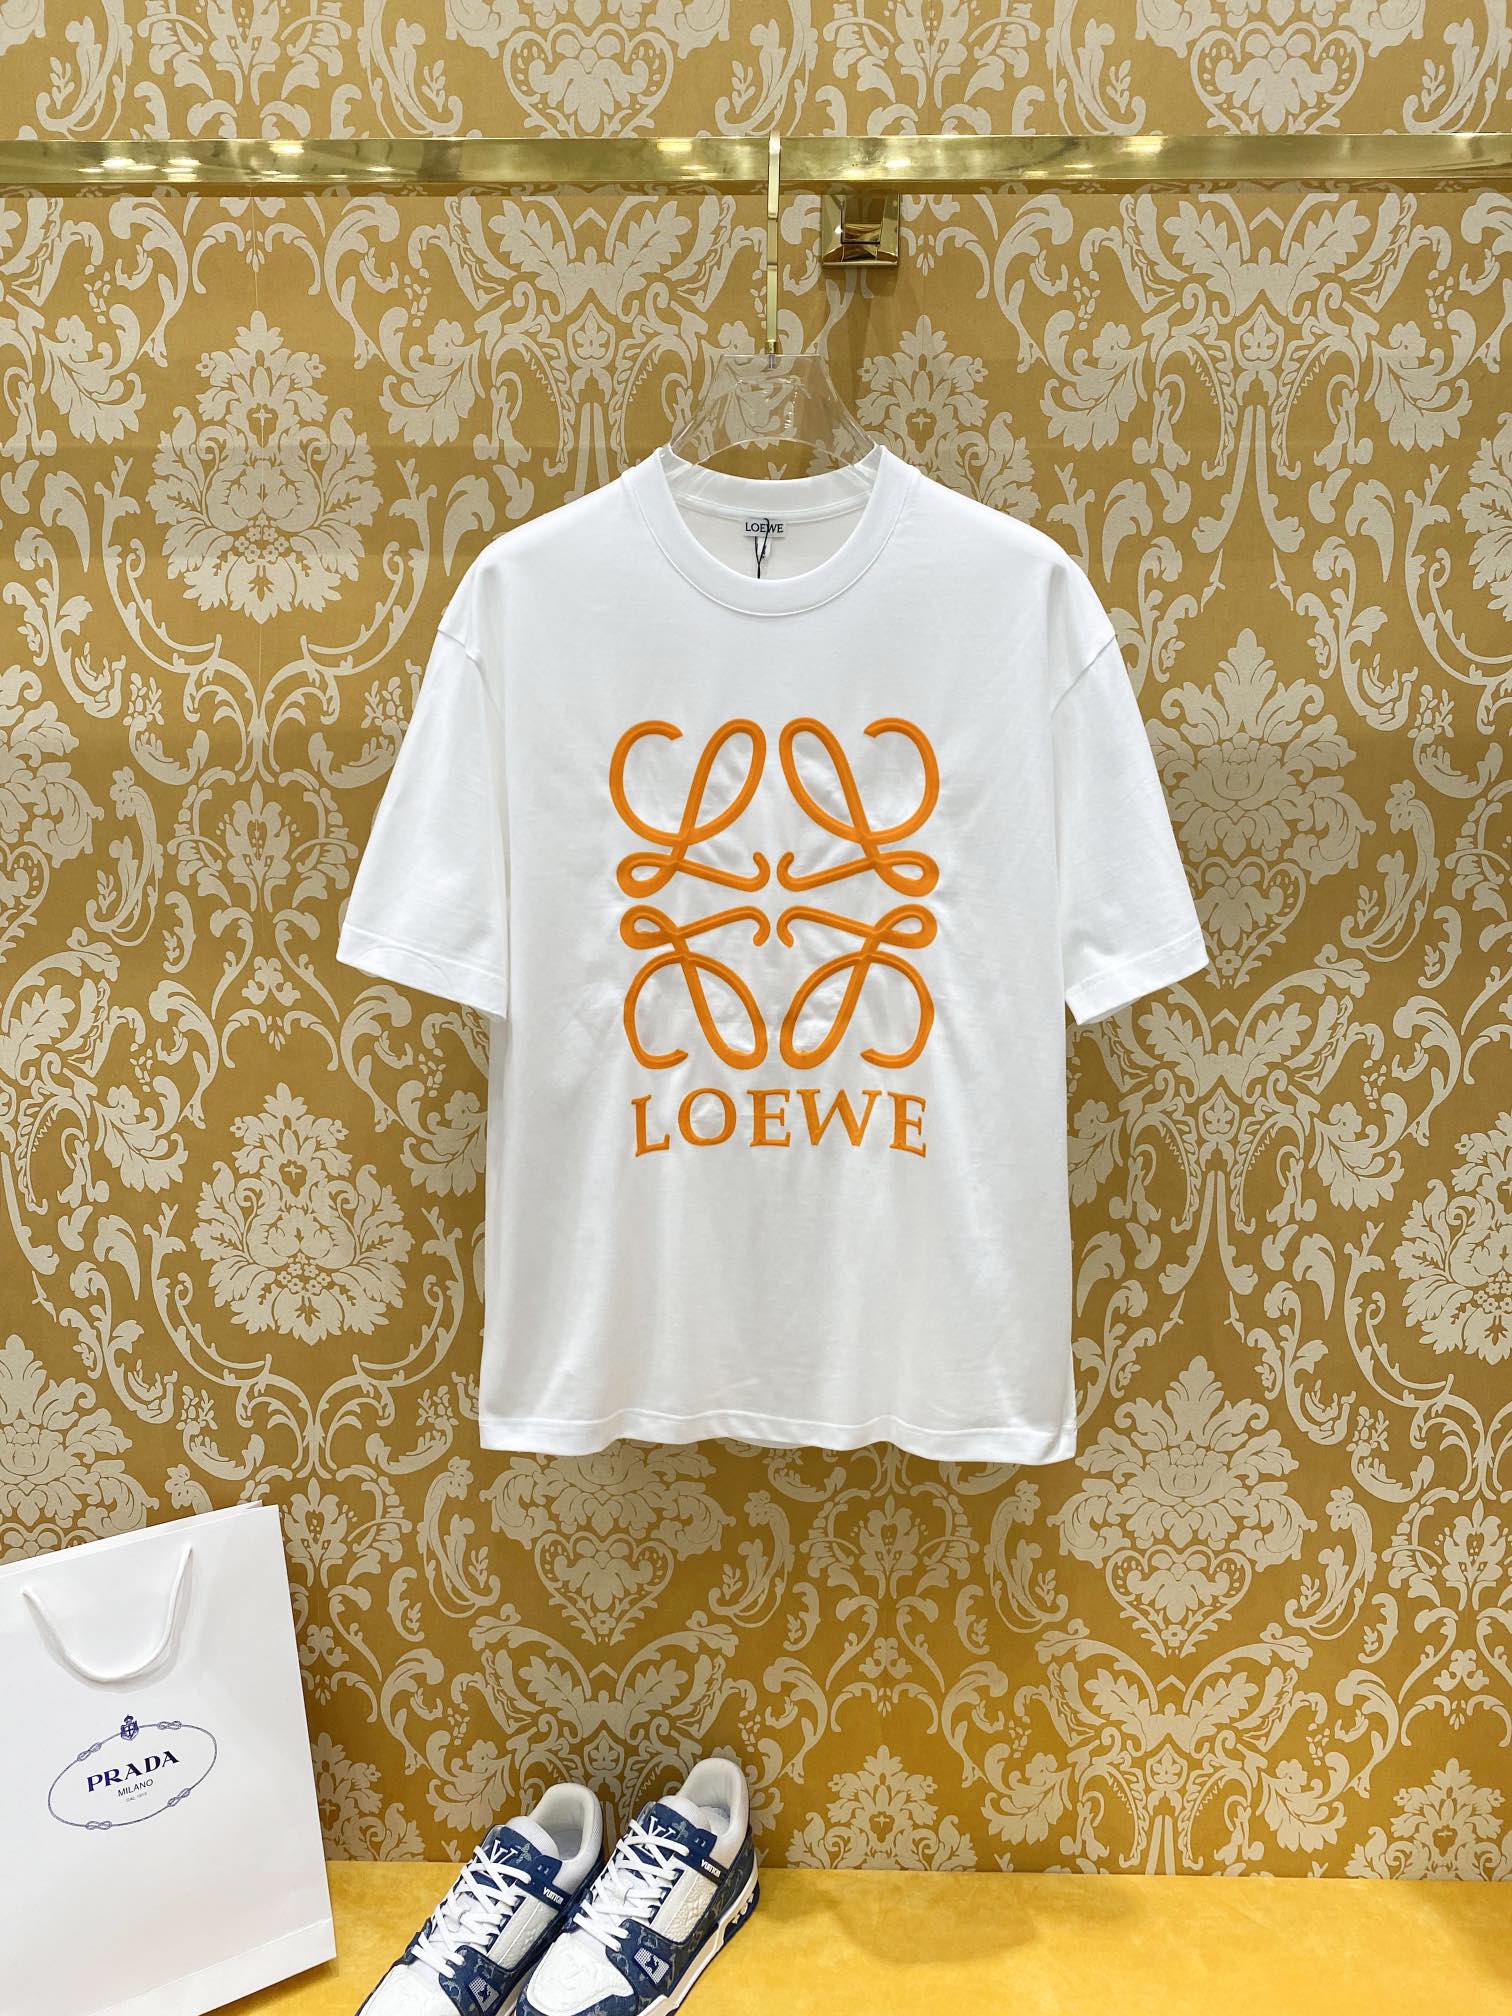 Loewe Store
 Clothing T-Shirt Cotton Mercerized Spring/Summer Collection Fashion Short Sleeve